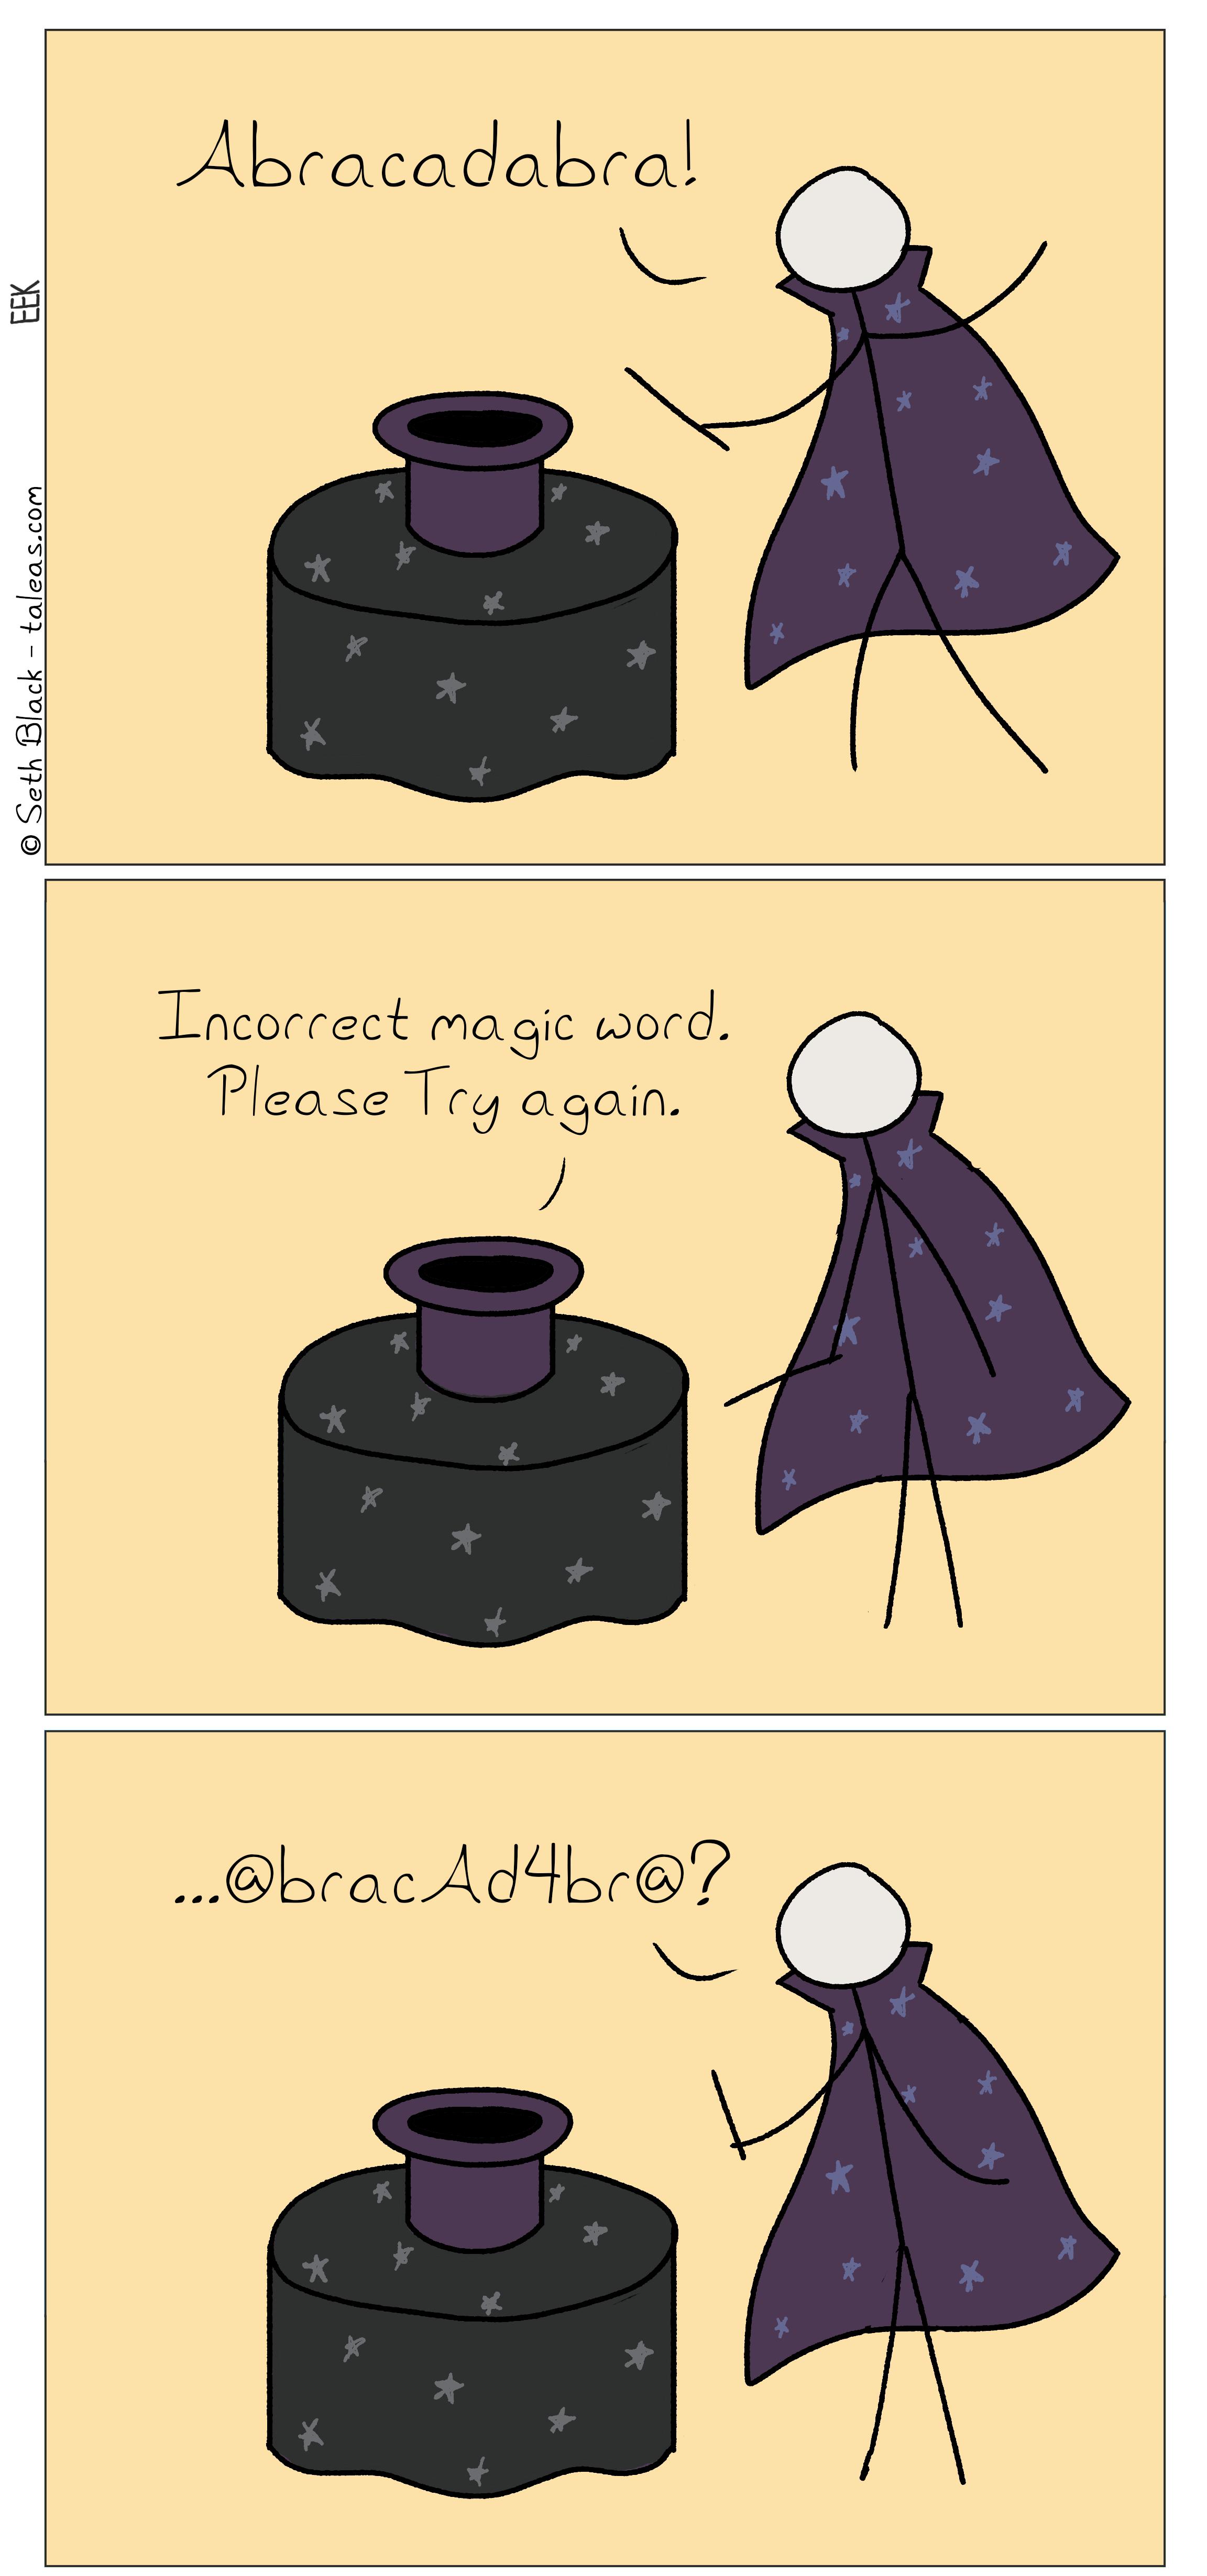 A purple-cloaked stick figure magician waves his magic wand over a magic top hat chanting, "abracadabra". The top hat responds, "Incorrect magic word, please try again." The magician, mildly confused, responds with "@bracAd4br@?"